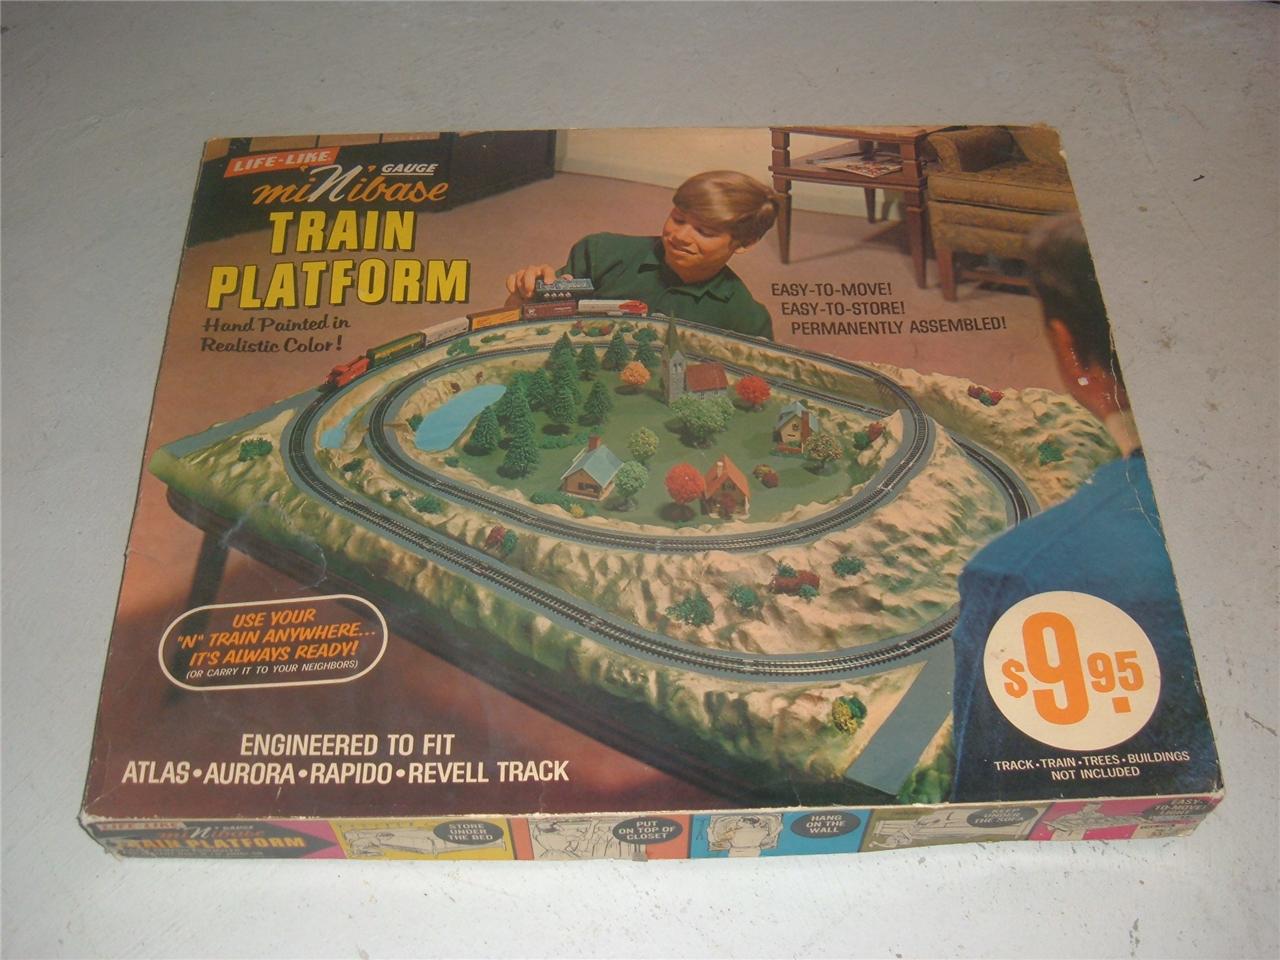 SCALE-TRAIN-SET-LAYOUT-PLATFOARM-VINtAGE-60s-WITH-POSTAGE-STAMP-TRAINS 